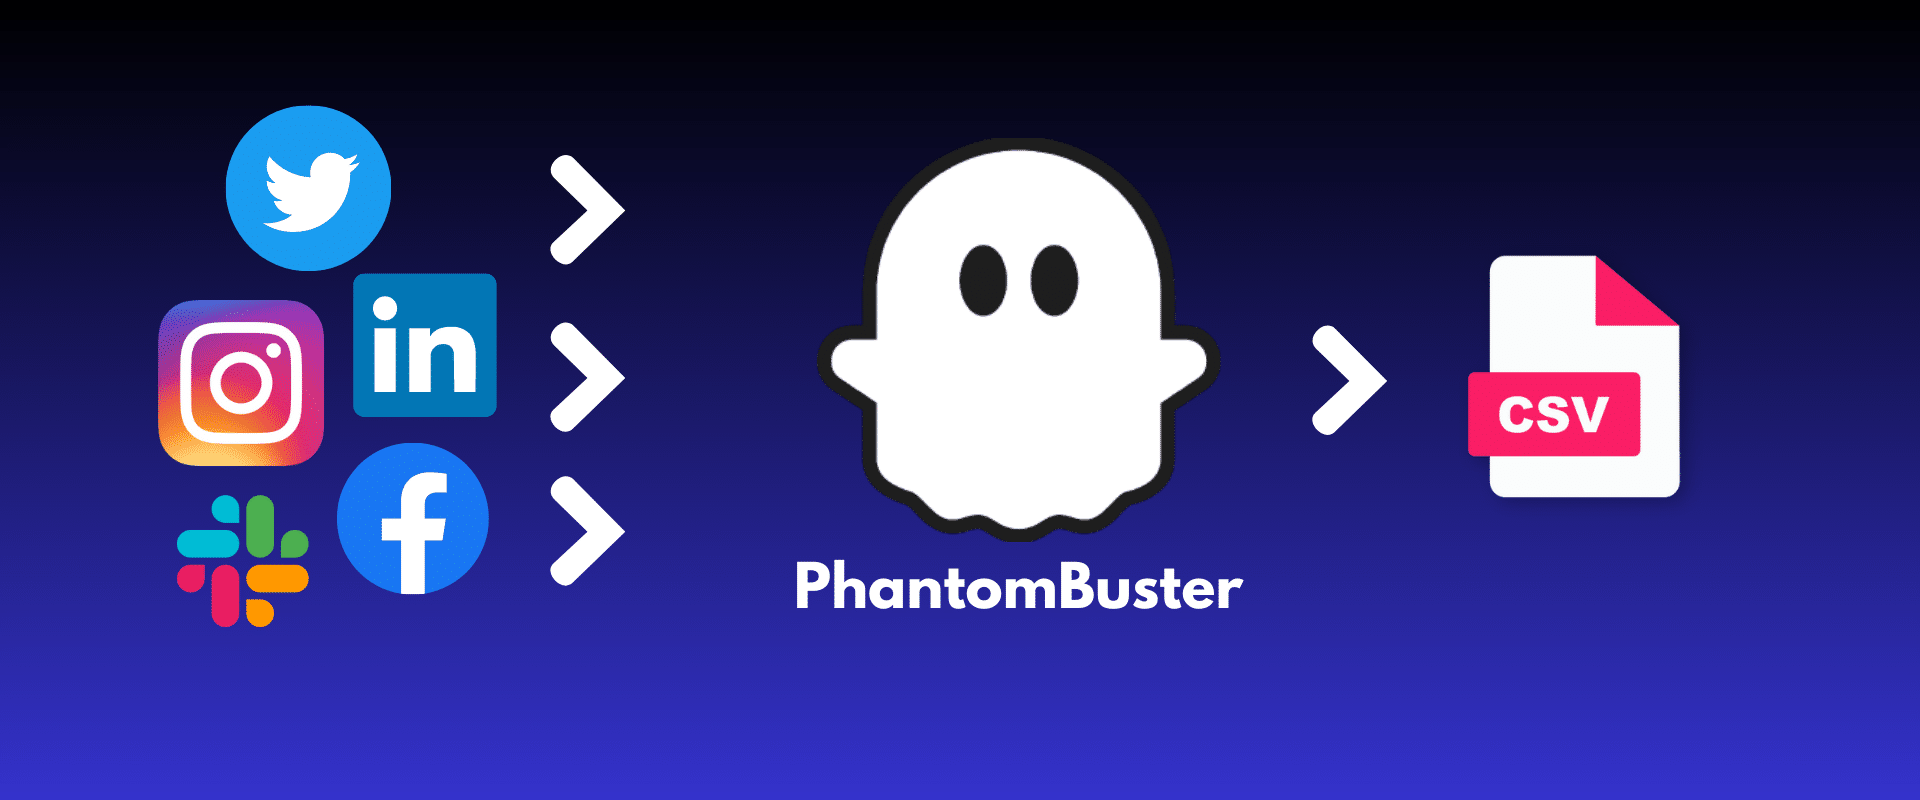 Phantombuster transforming Instagram emails into a csv file.